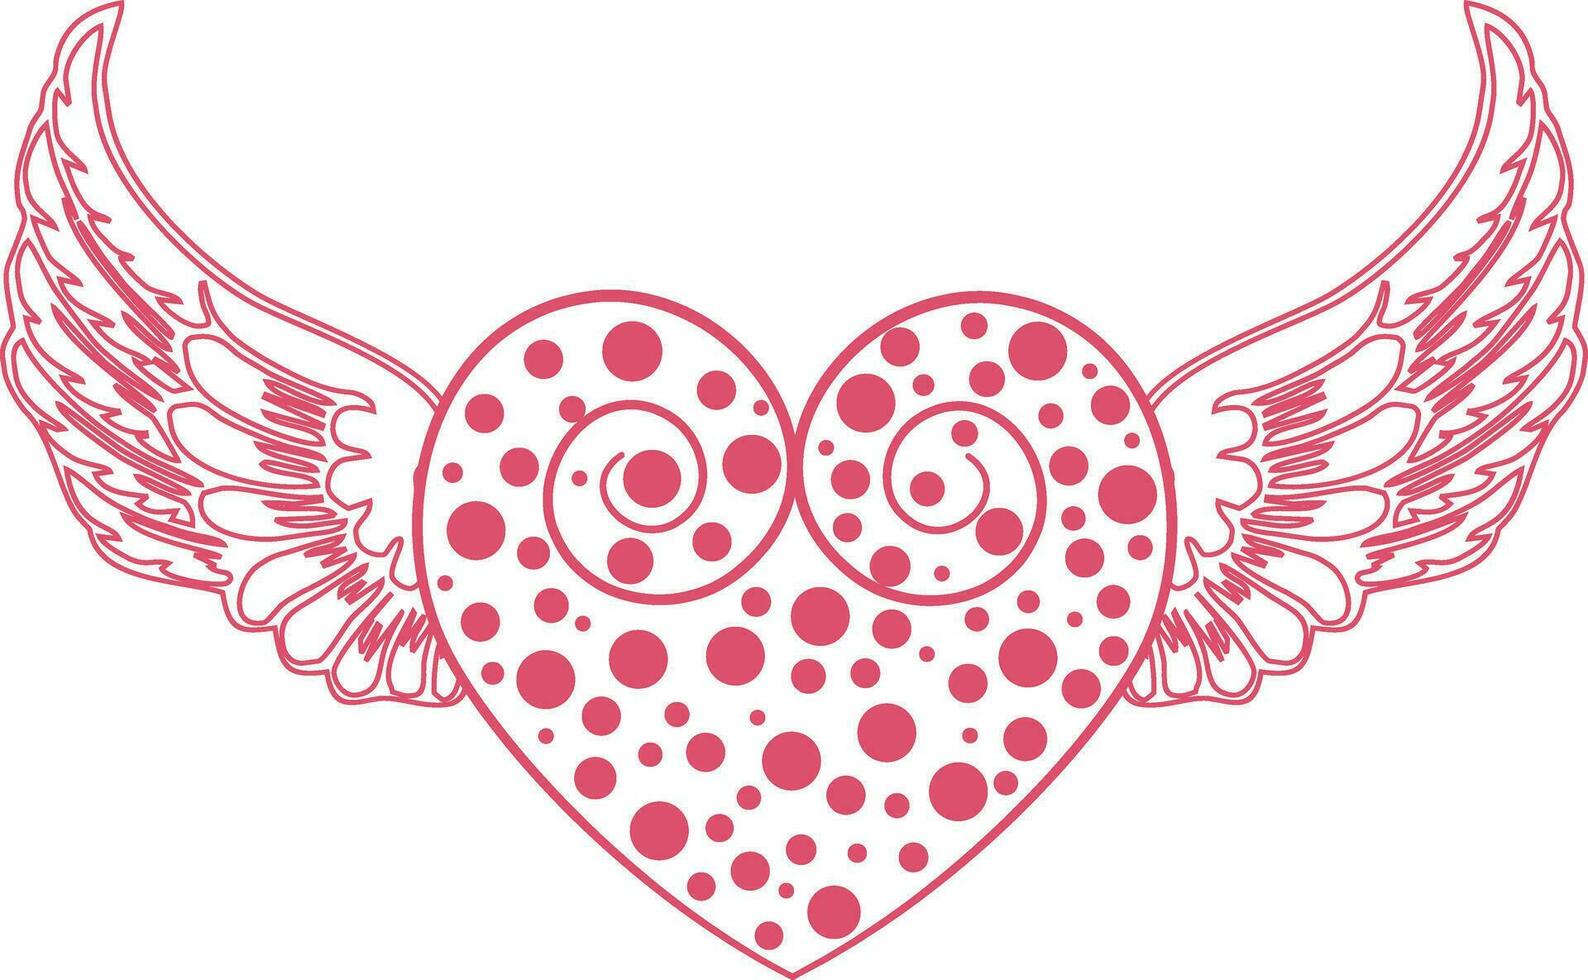 Stylized heart with wings floral design. vector